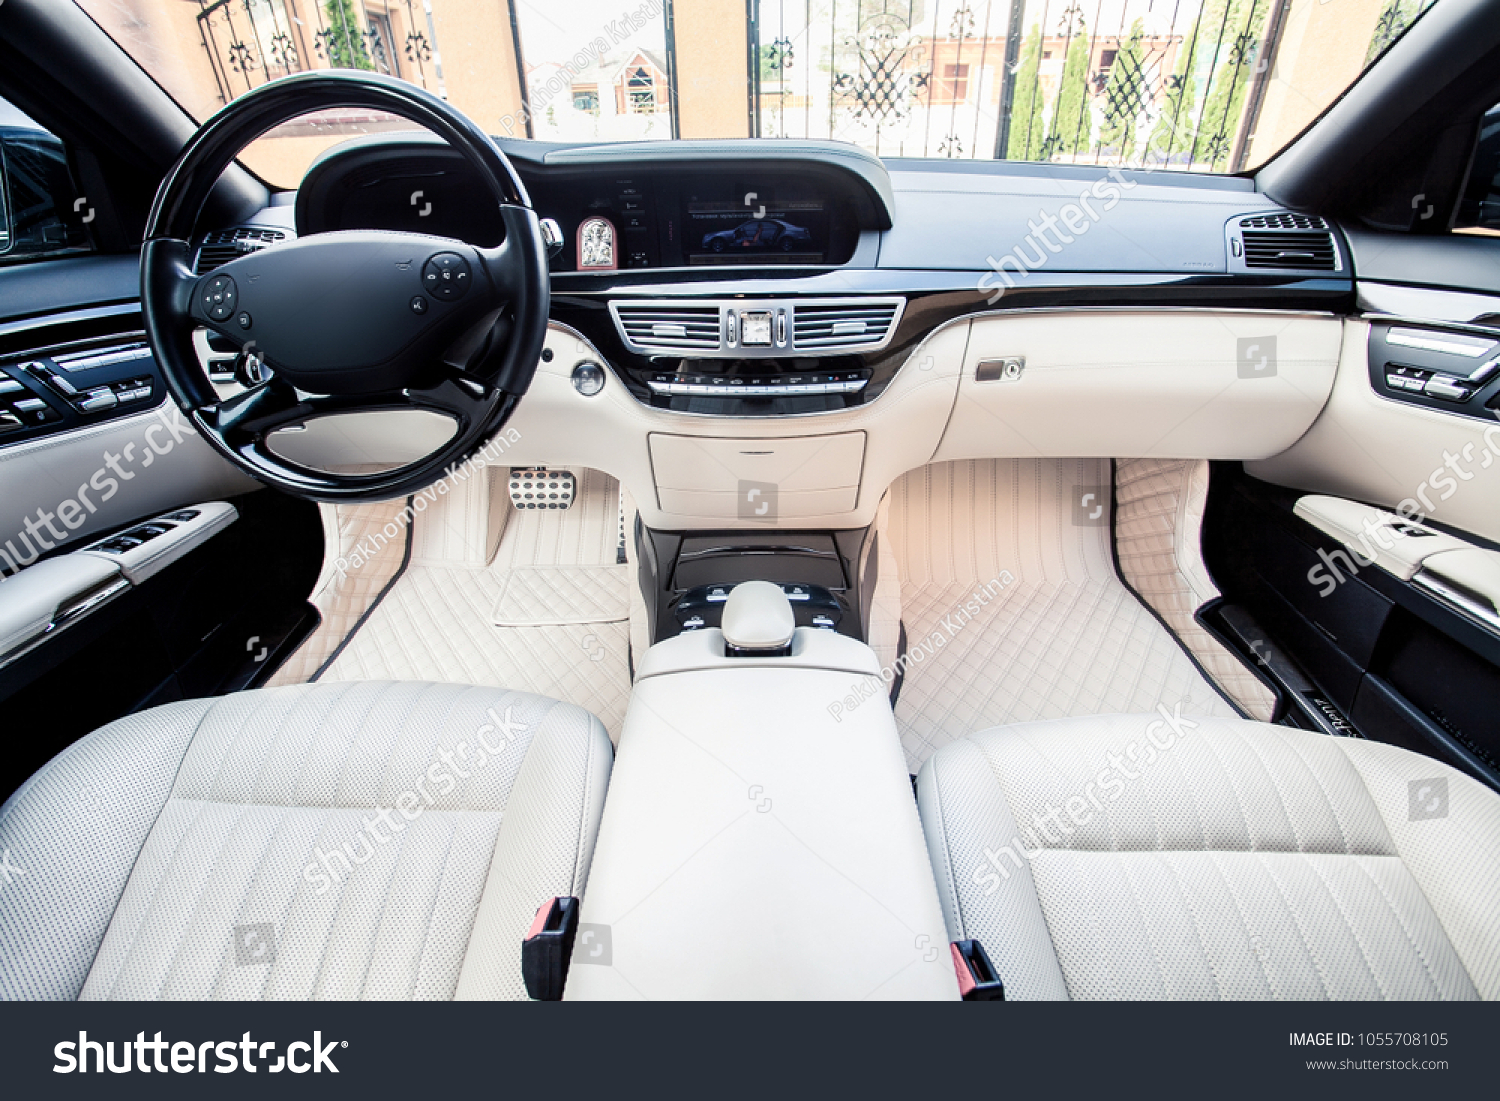 Luxury car interior. Steering wheel, shift lever and dashboard. #1055708105